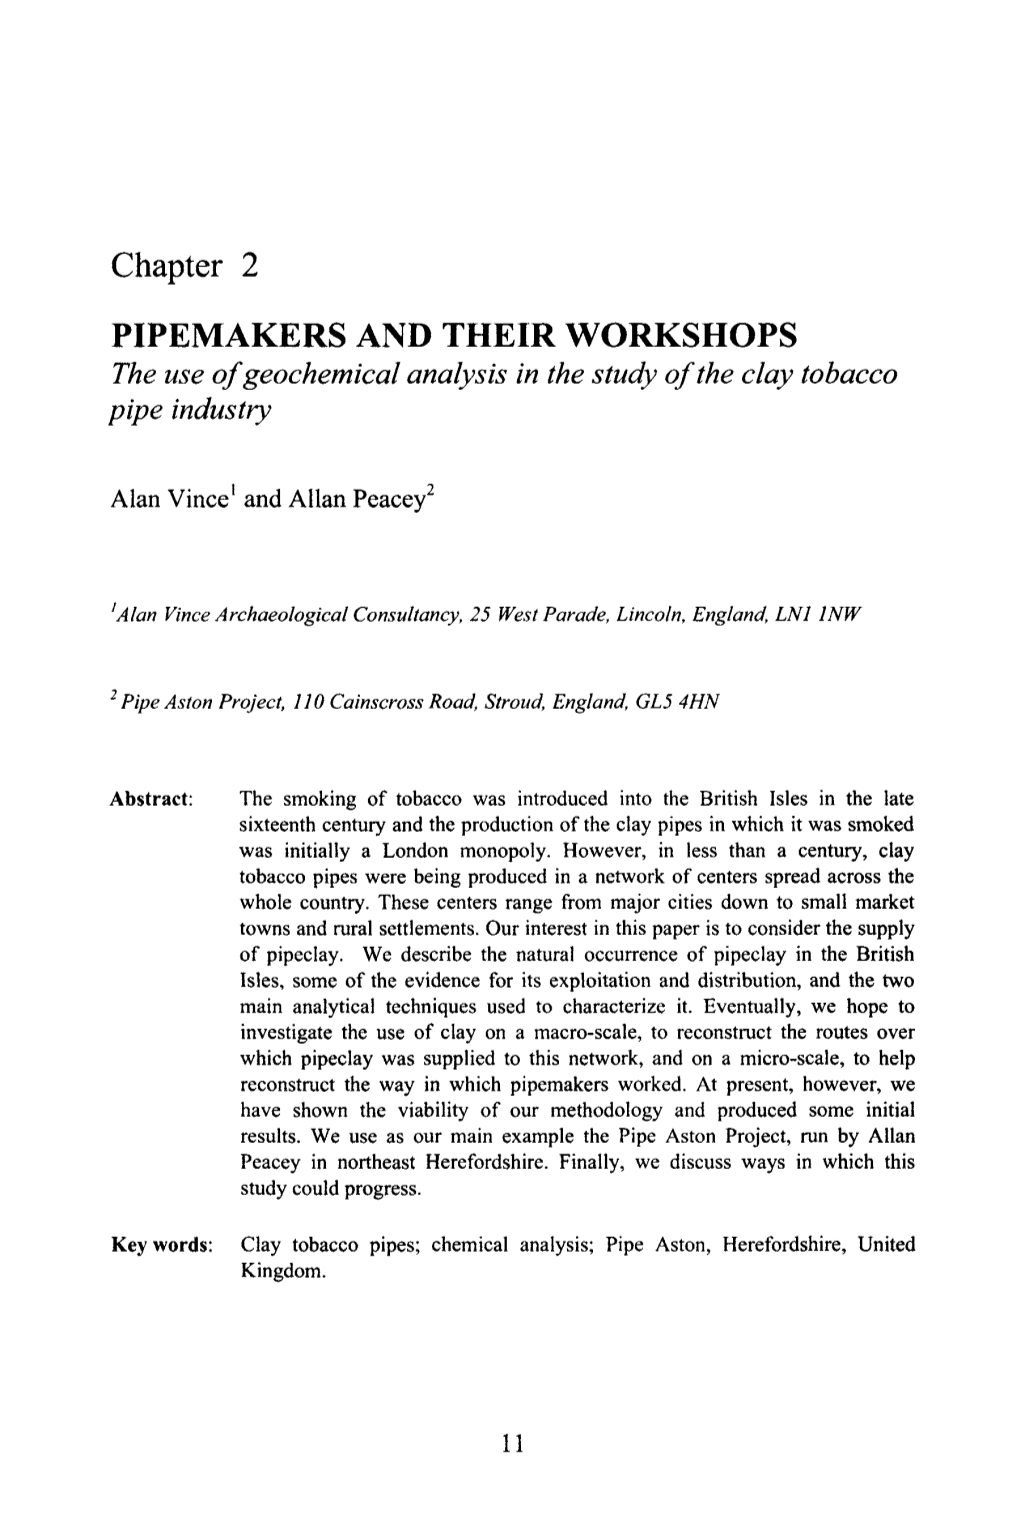 Chapter 2 PIPEMAKERS and THEIR WORKSHOPS the Use of Geochemical Analysis in the Study of the Clay Tobacco Pipe Industry